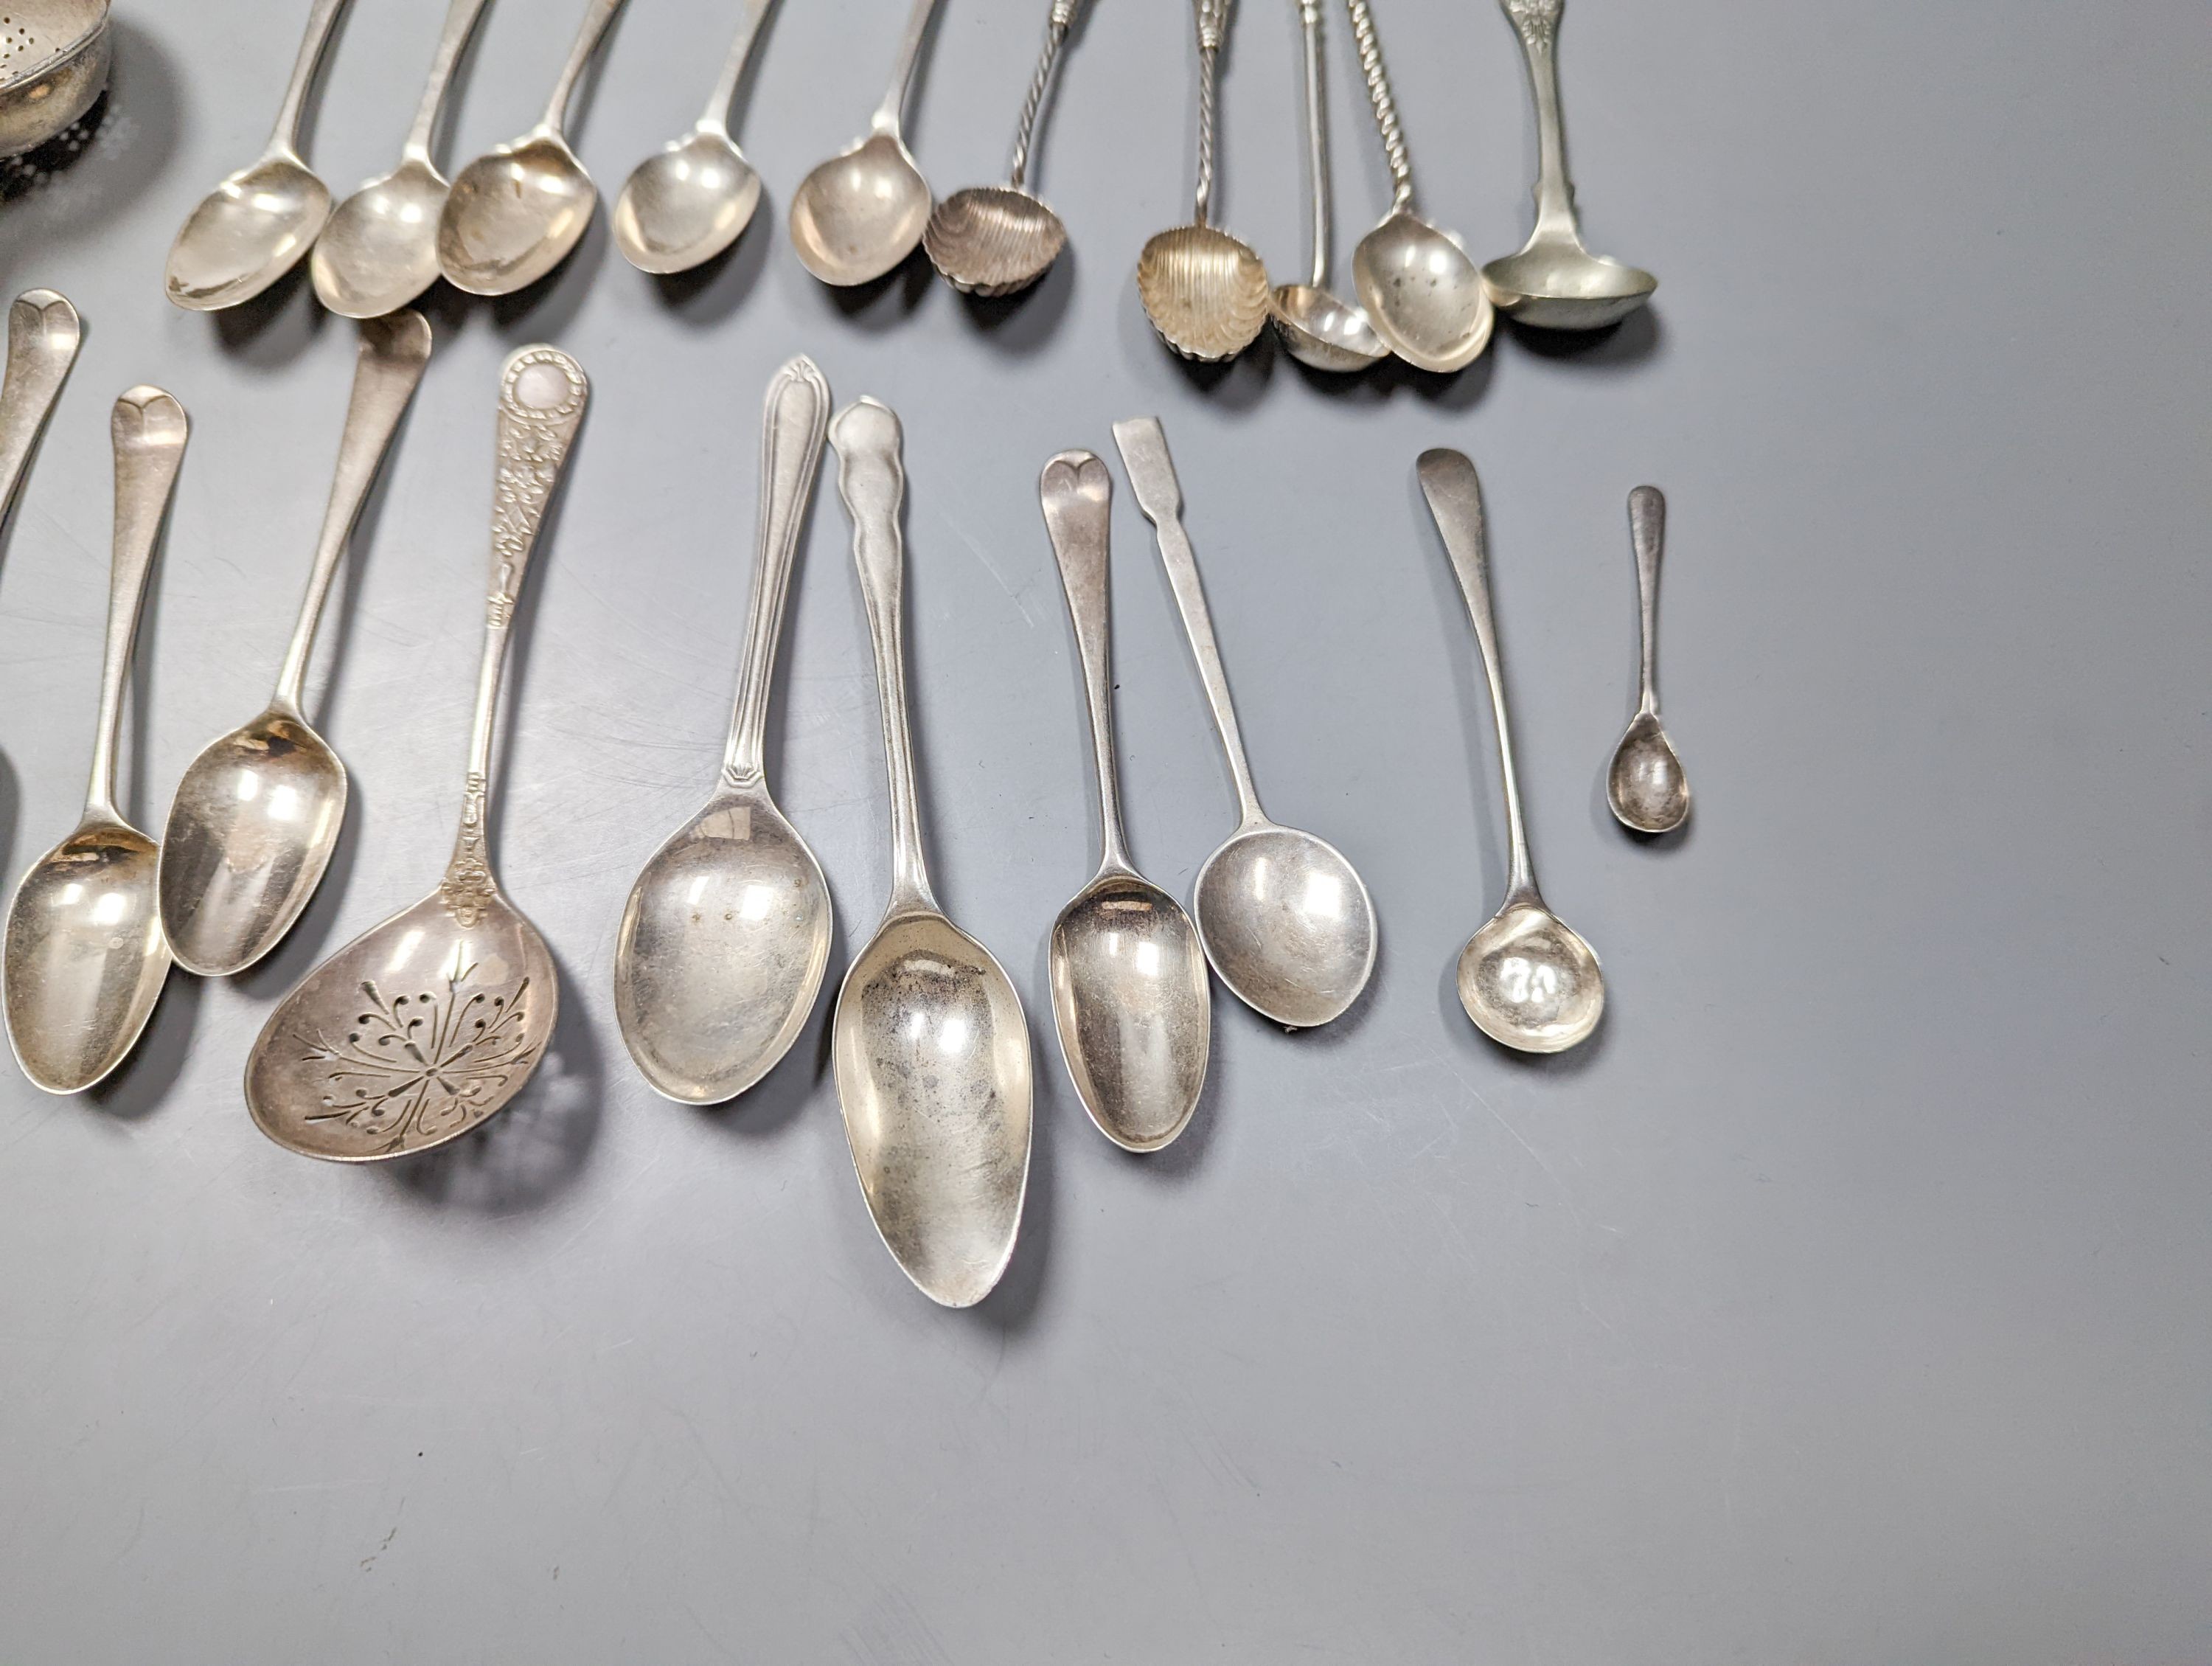 A mixed quantity of 18th, 19th and 20th century silver flatware, including tablespoons, teaspoons, sauce ladles, a 900 standard cake slice, two plated spoons and a nail implement